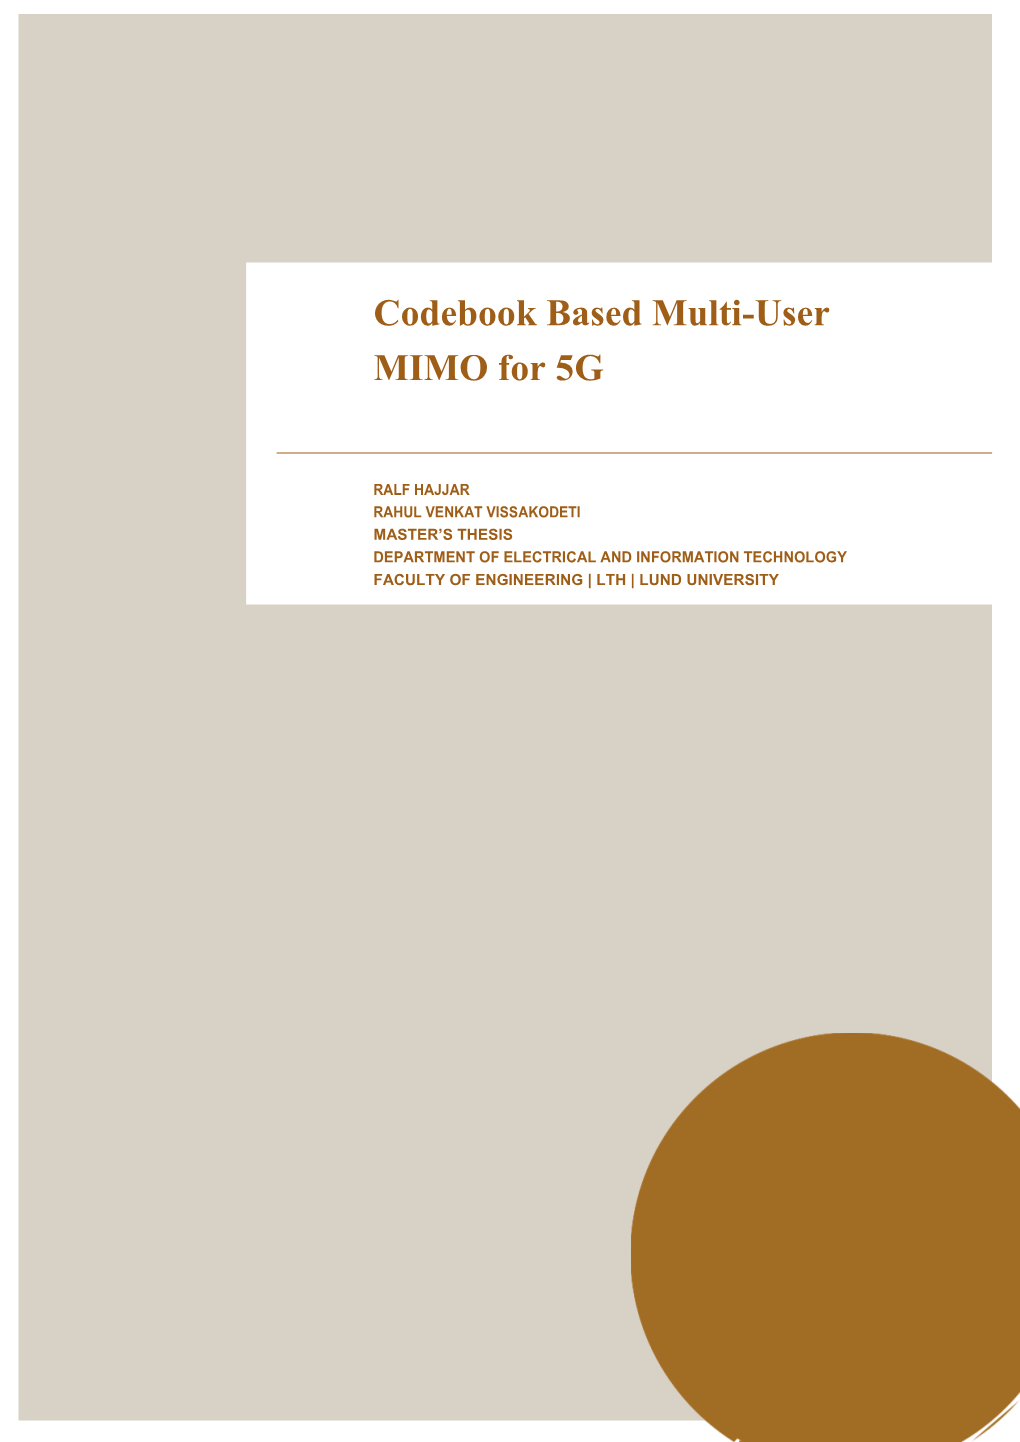 Codebook Based Multi-User MIMO for 5G